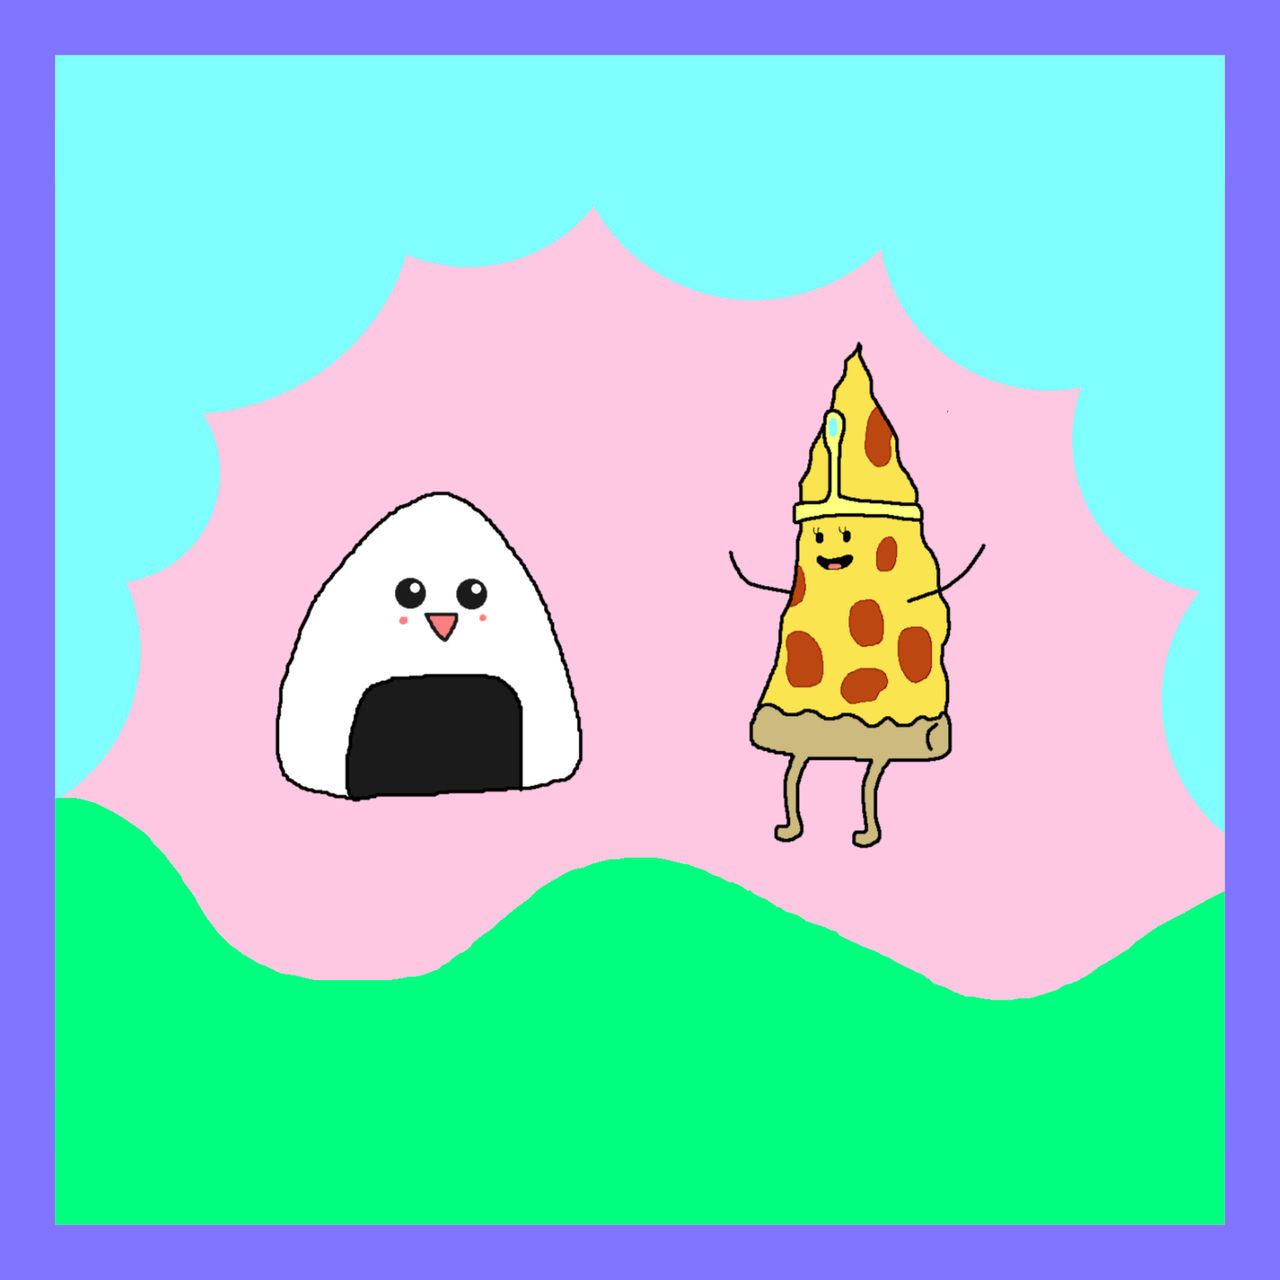 An adventure time style drawing of a little sushi guy and pizza dude.